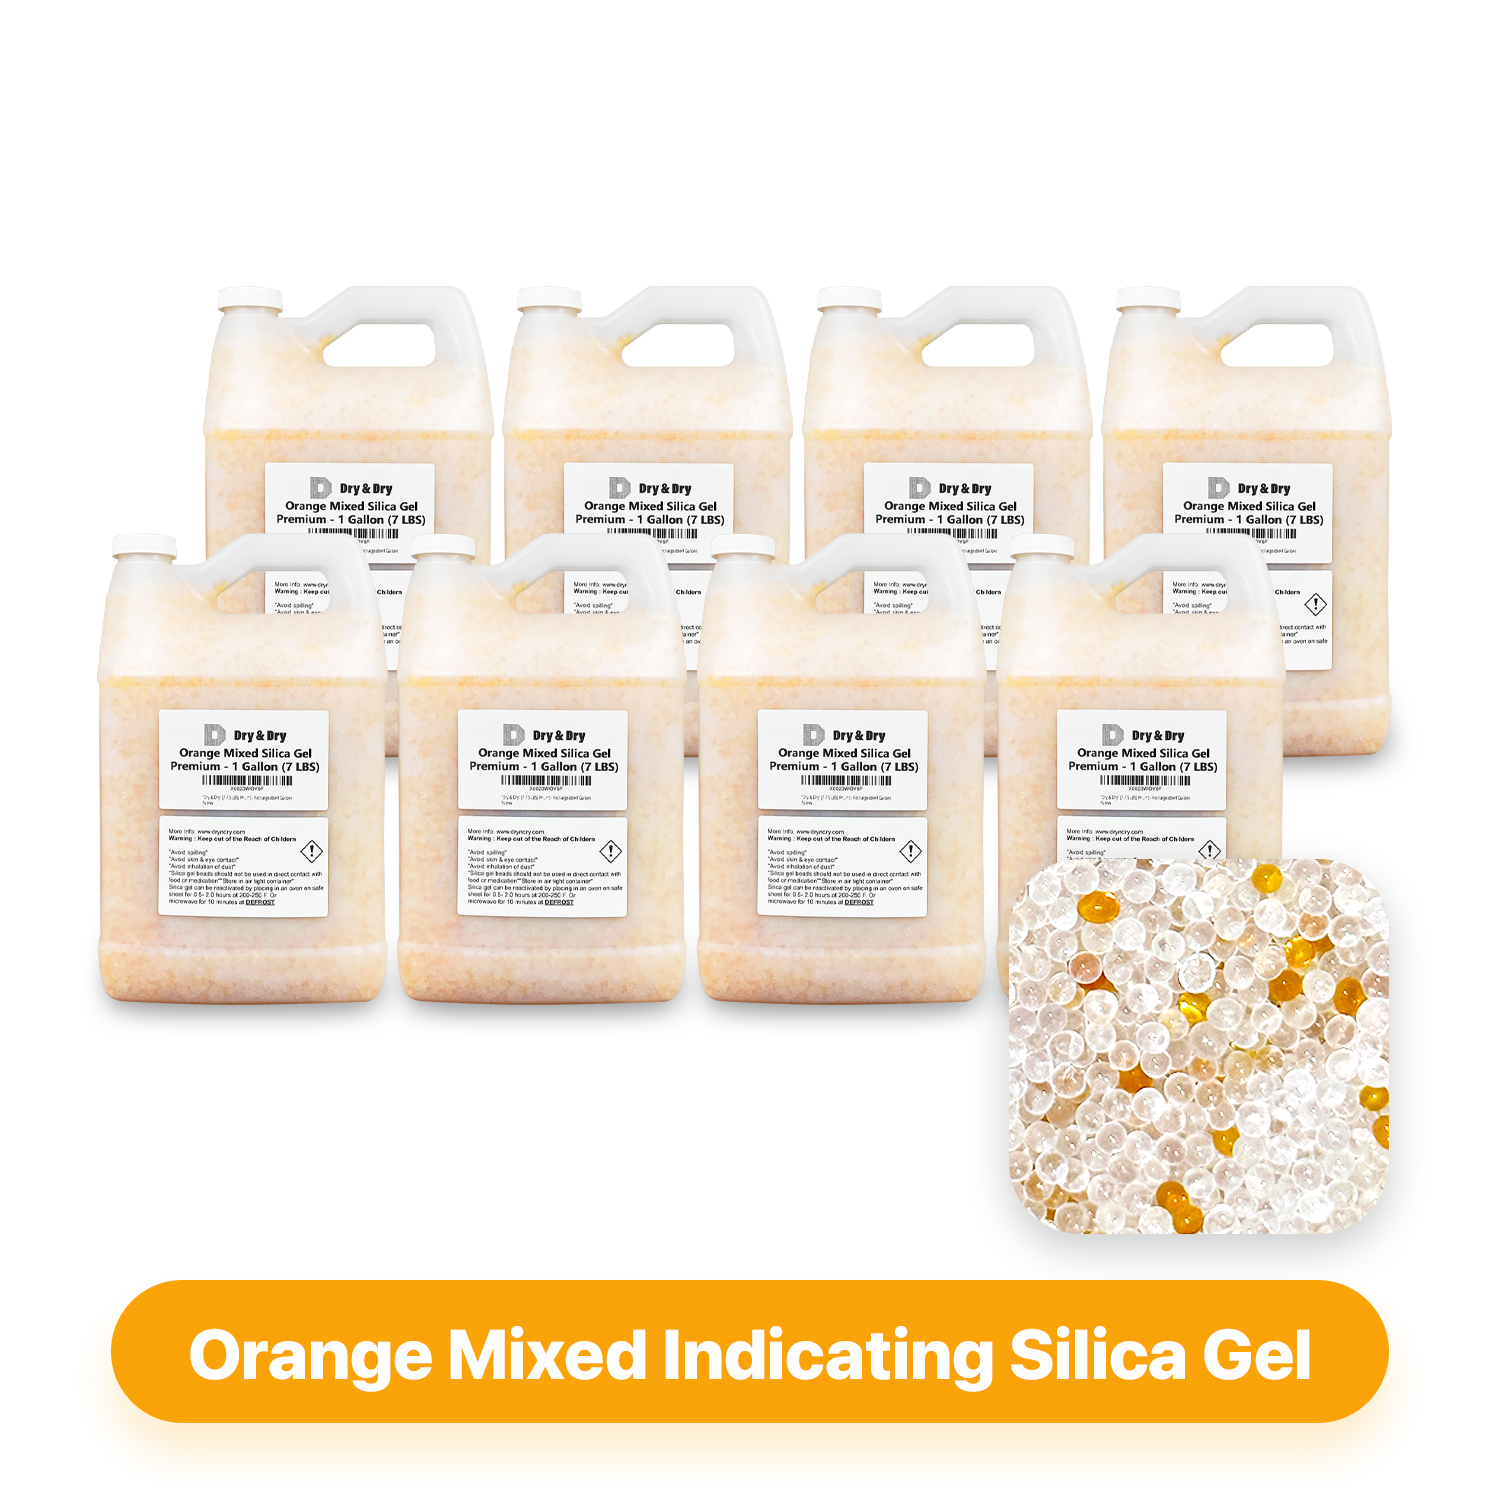 8 Gallon(56-60 LBS) "Dry & Dry" Premium Orange & White Mixed Indicating Silica Gel Desiccant Beads(Industry Standard 3-5 mm) - Rechargeable